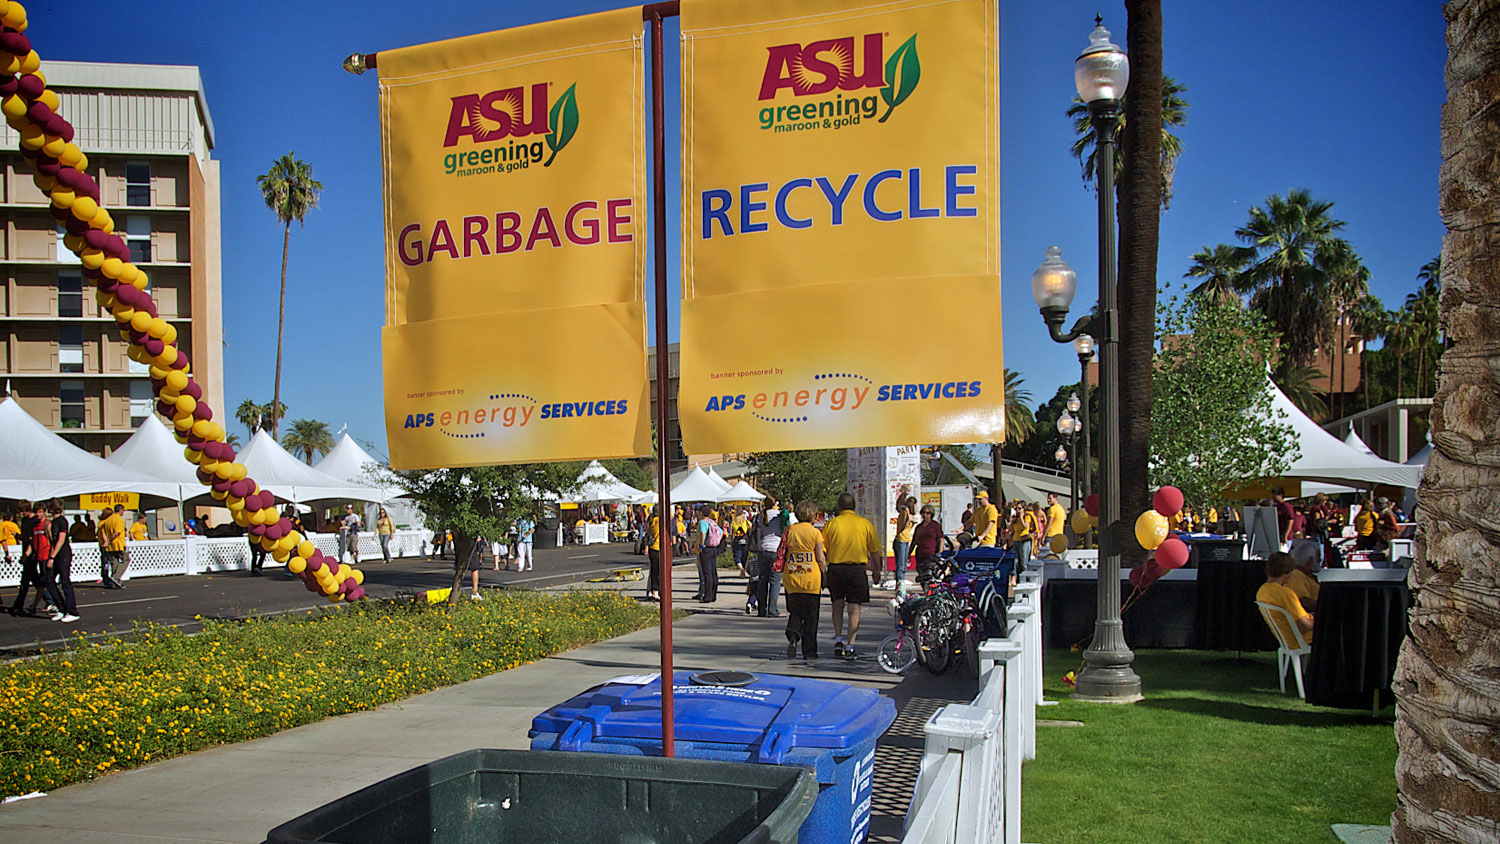 An outdoor ASU event is pictured, with ASU's special garbage and recycling containers in view.